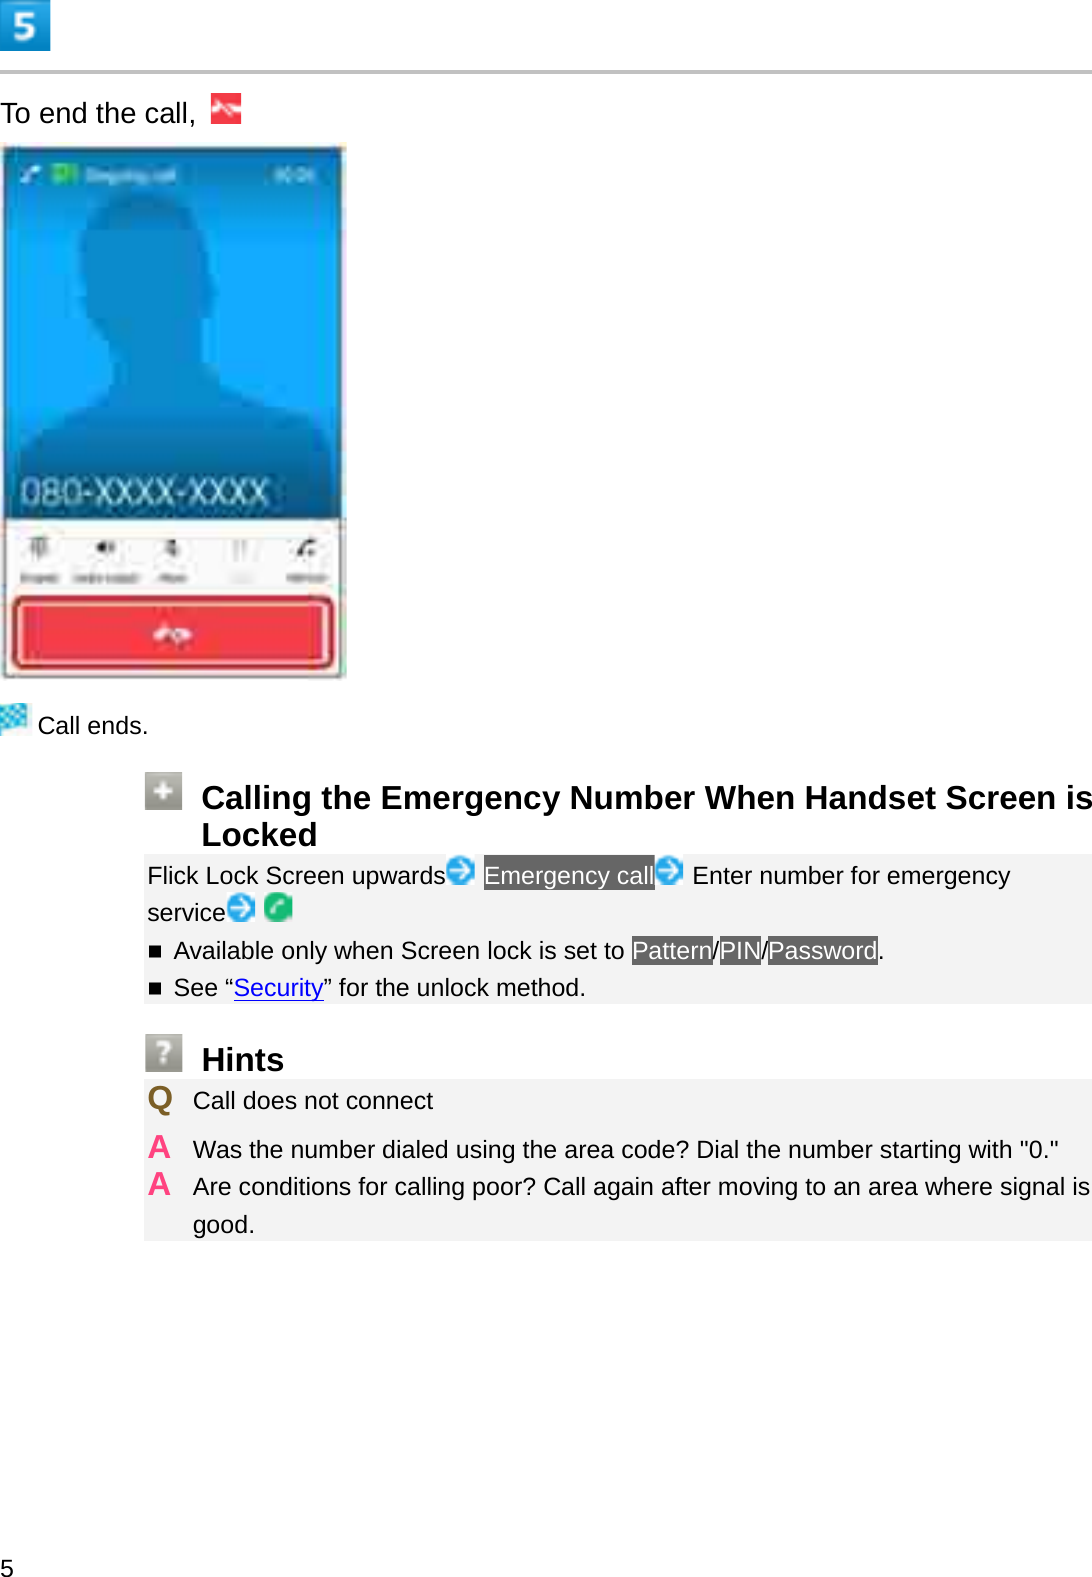 To end the call, Call ends.Calling the Emergency Number When Handset Screen is LockedFlick Lock Screen upwards Emergency call Enter number for emergency serviceAvailable only when Screen lock is set to Pattern/PIN/Password.See “Security” for the unlock method.HintsQCall does not connectAWas the number dialed using the area code? Dial the number starting with &quot;0.&quot;AAre conditions for calling poor? Call again after moving to an area where signal is good.5